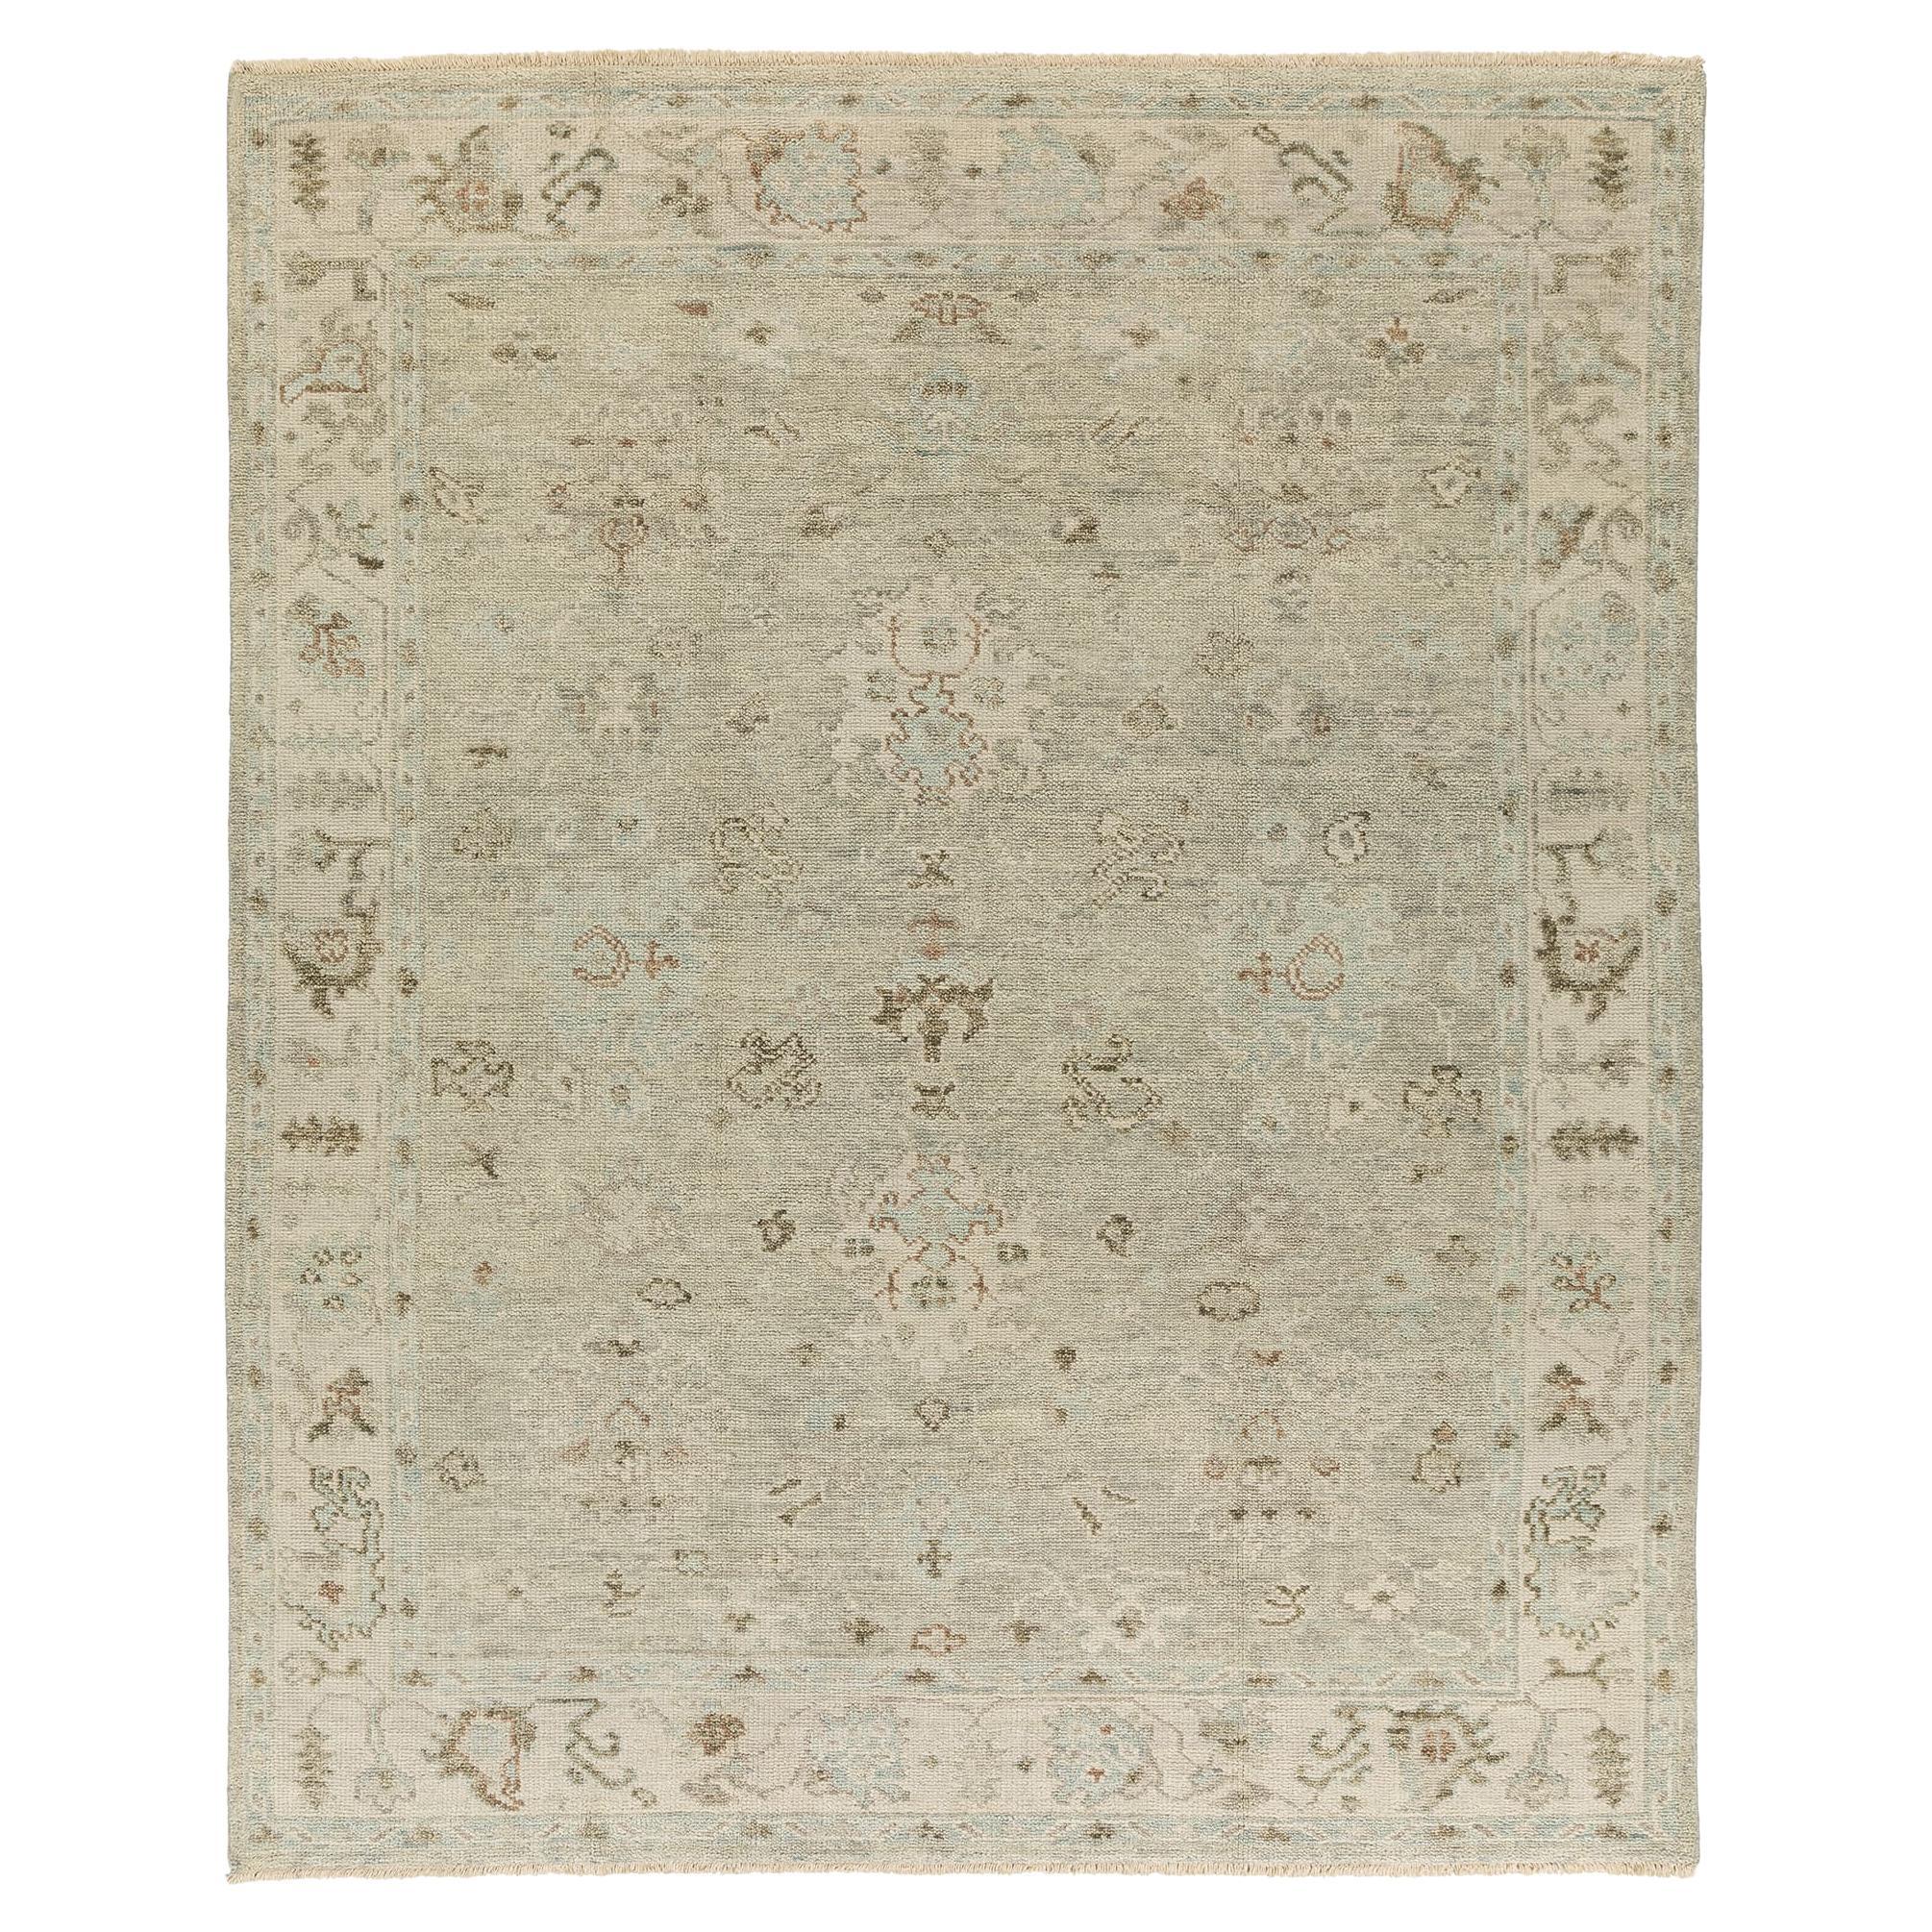 Briana Bone 8x10, Bordered Rugs, Traditional, Vintage, Beiges, Greys, Neutrals For Sale